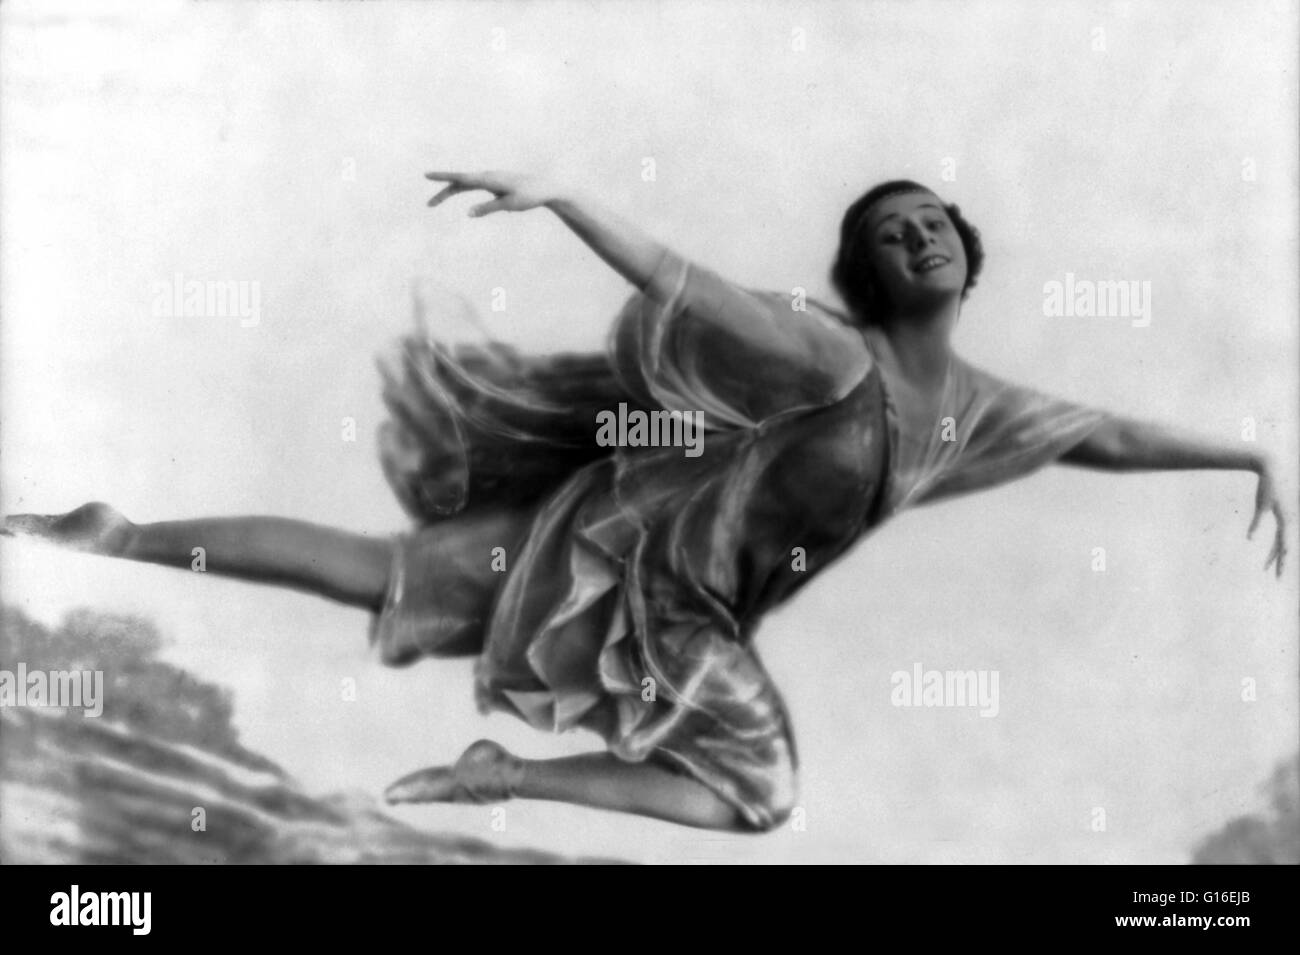 Anna Pavlovna (Matveyevna) Pavlova (February 12, 1881 - January 23, 1931) was a Russian prima ballerina of the late 19th and the early 20th centuries. She was a principal artist of the Imperial Russian Ballet and the Ballets Russes of Sergei Diaghilev. Pa Stock Photo